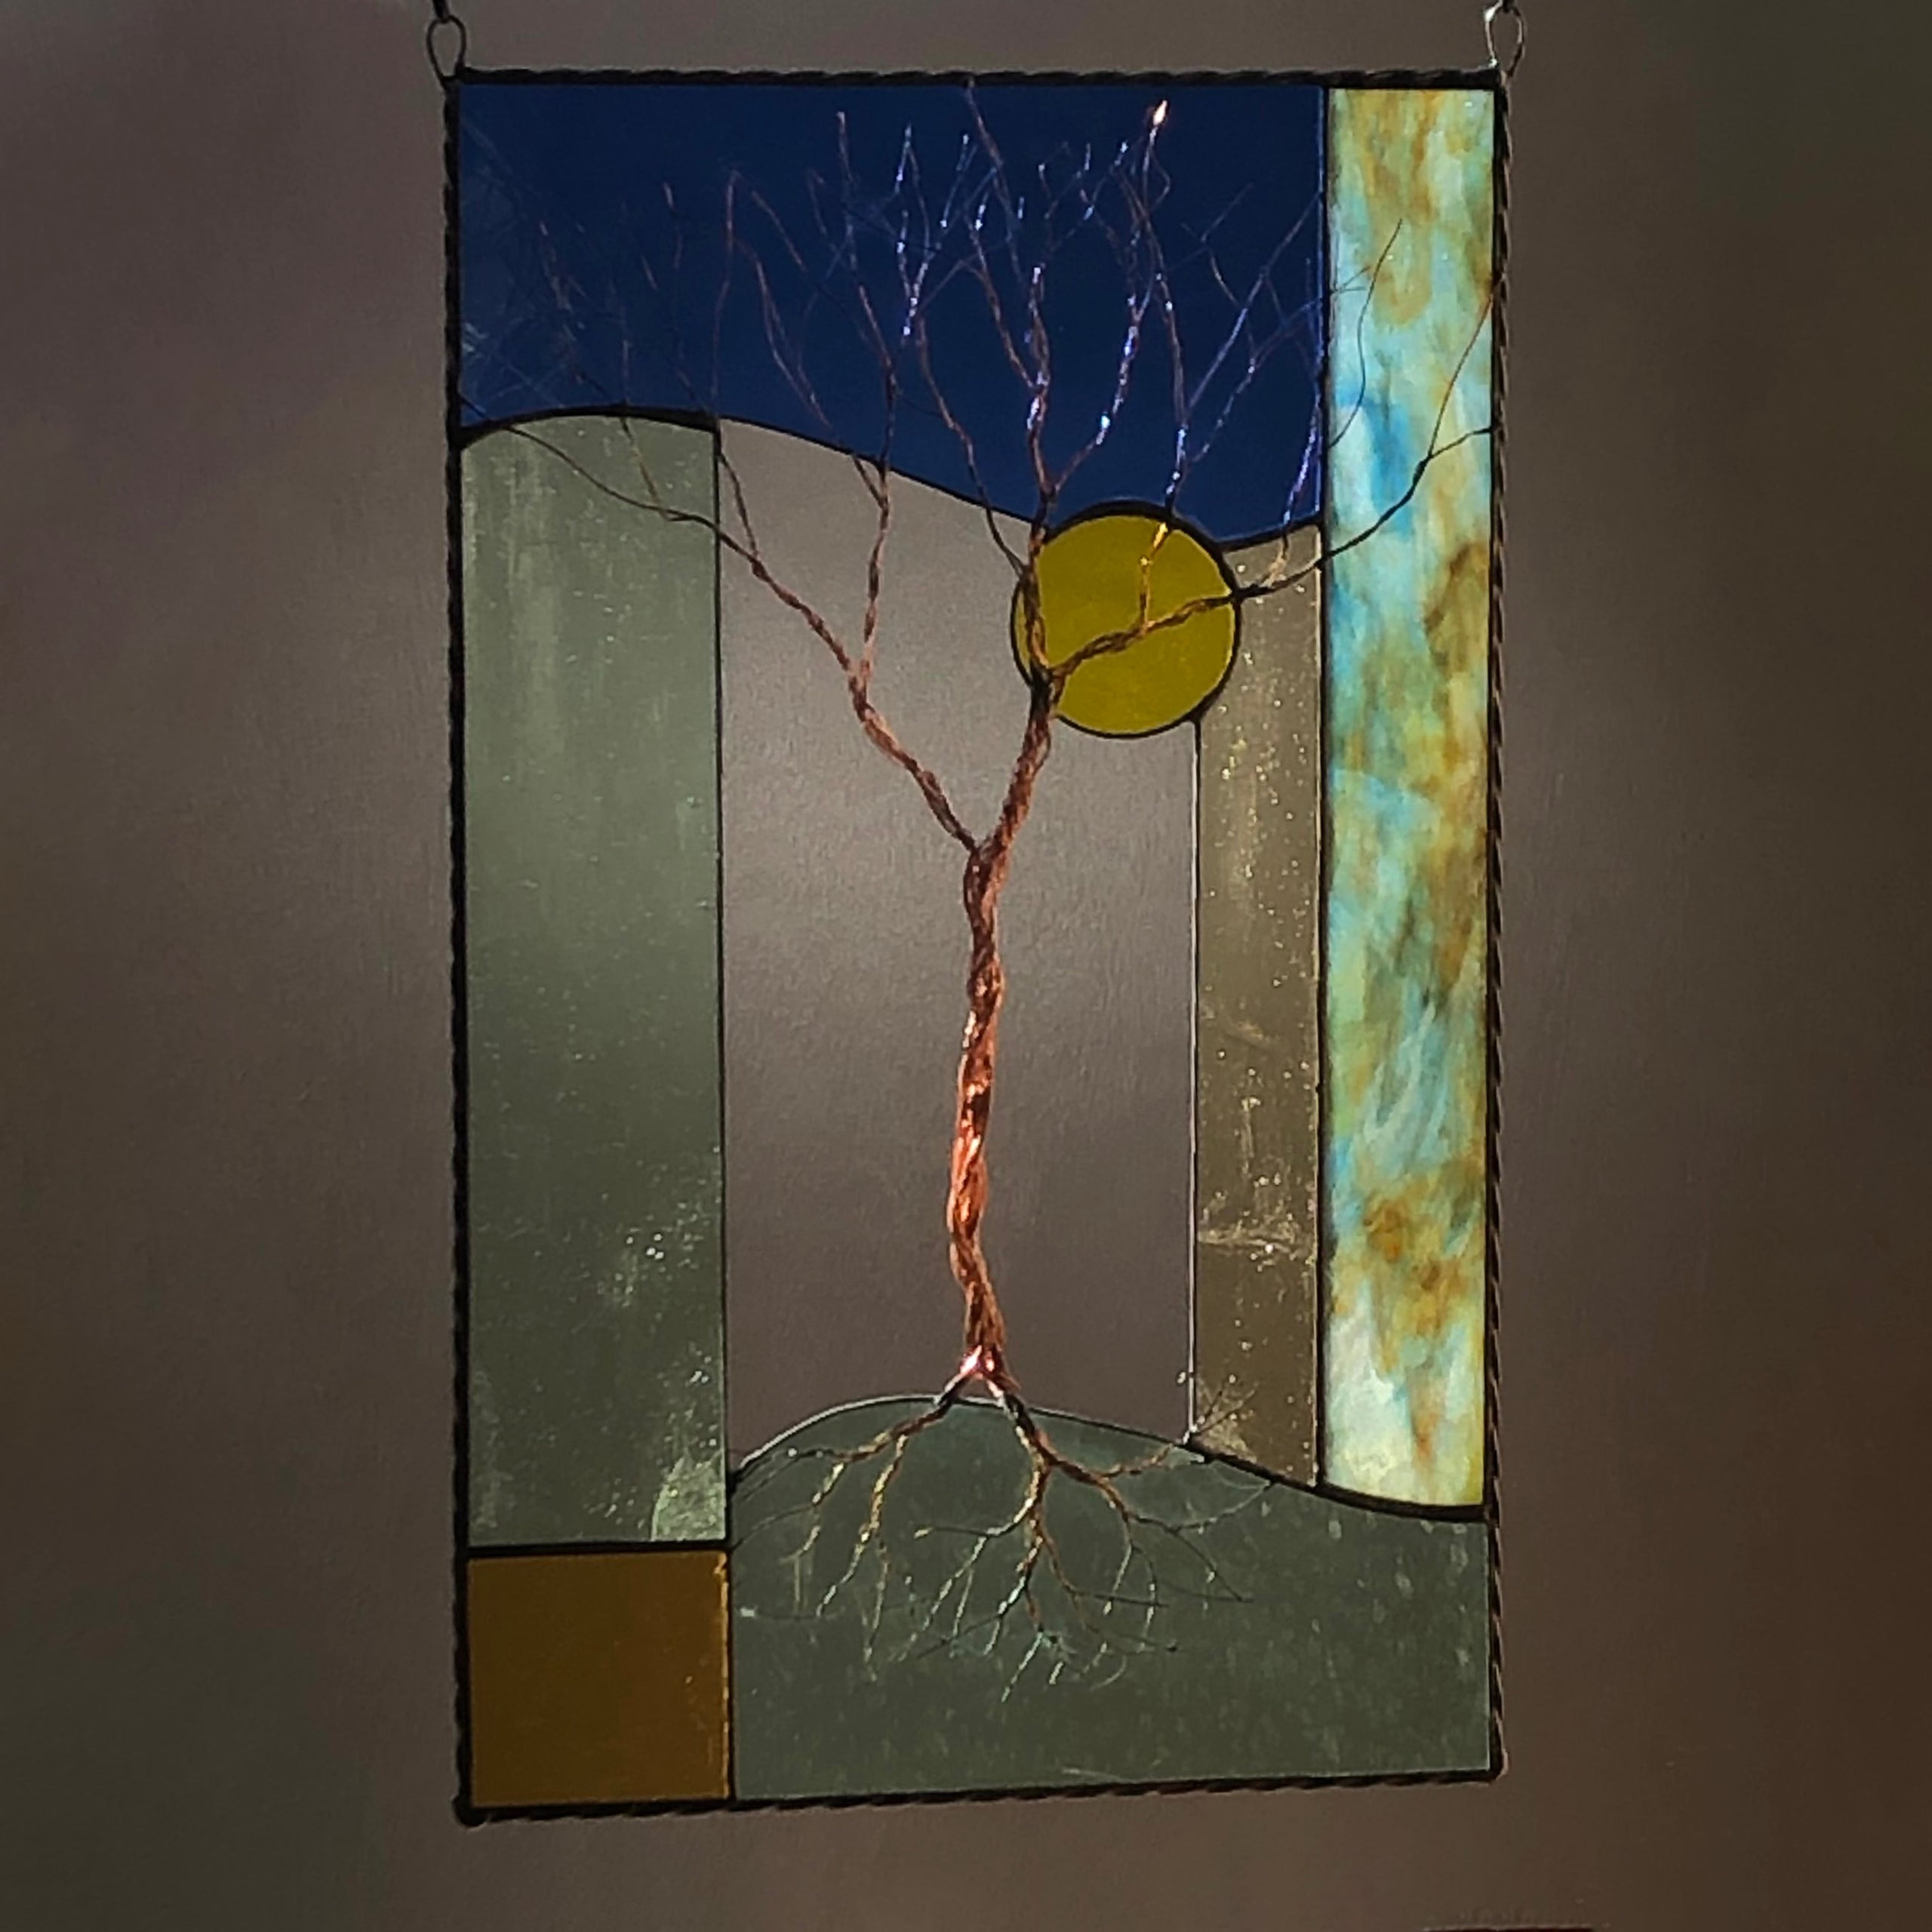 2/2 “Stained Glass Tree” Instructed Painting